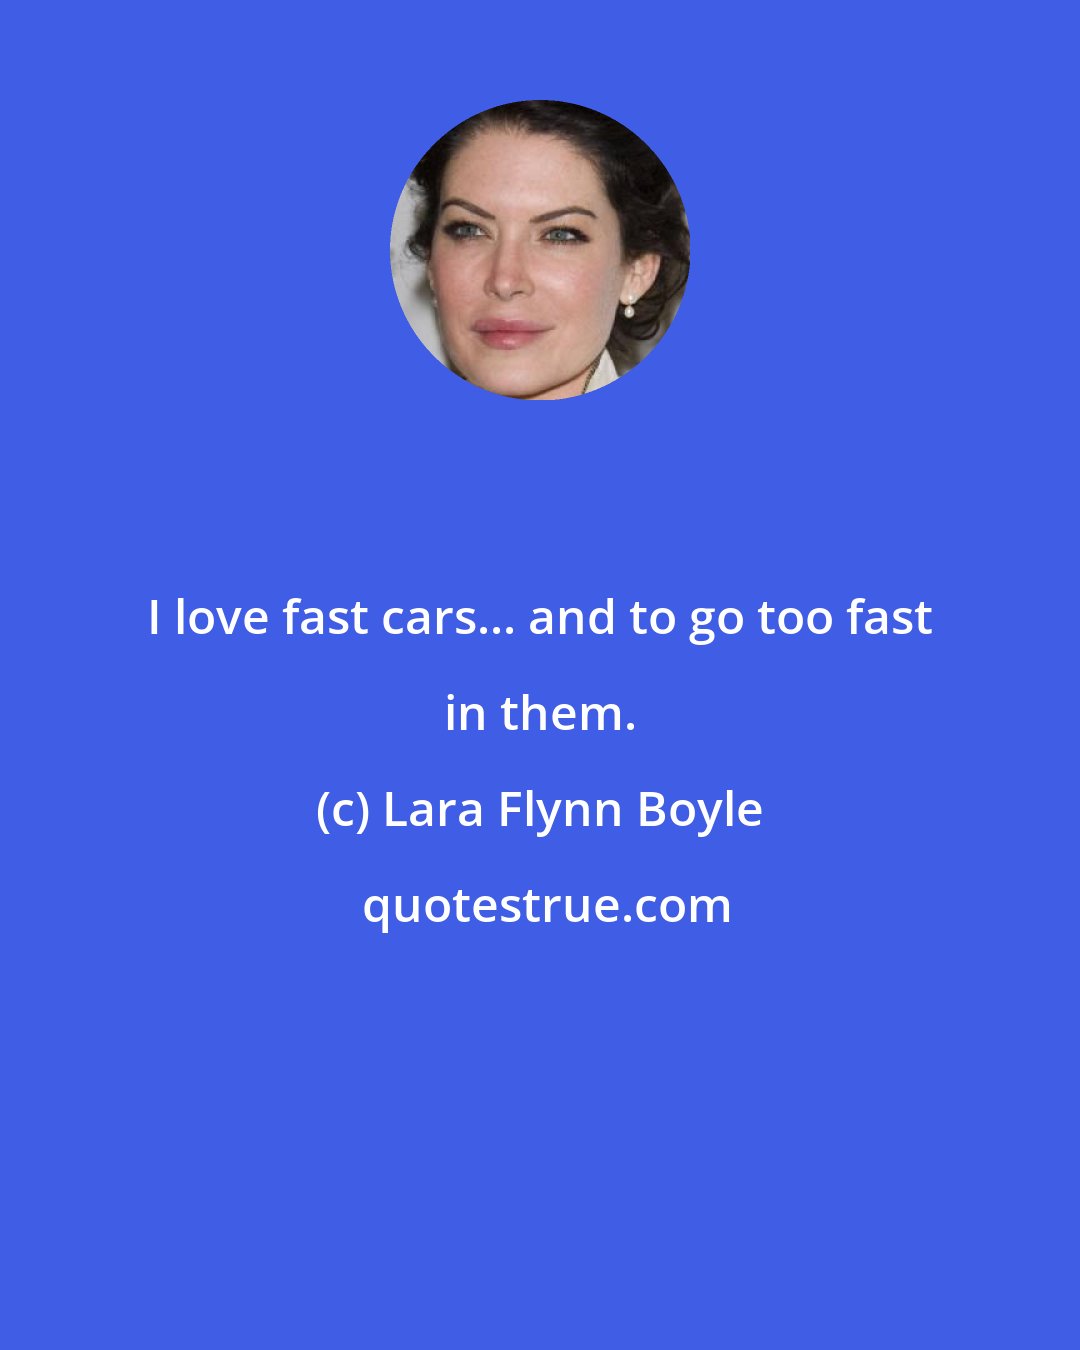 Lara Flynn Boyle: I love fast cars... and to go too fast in them.